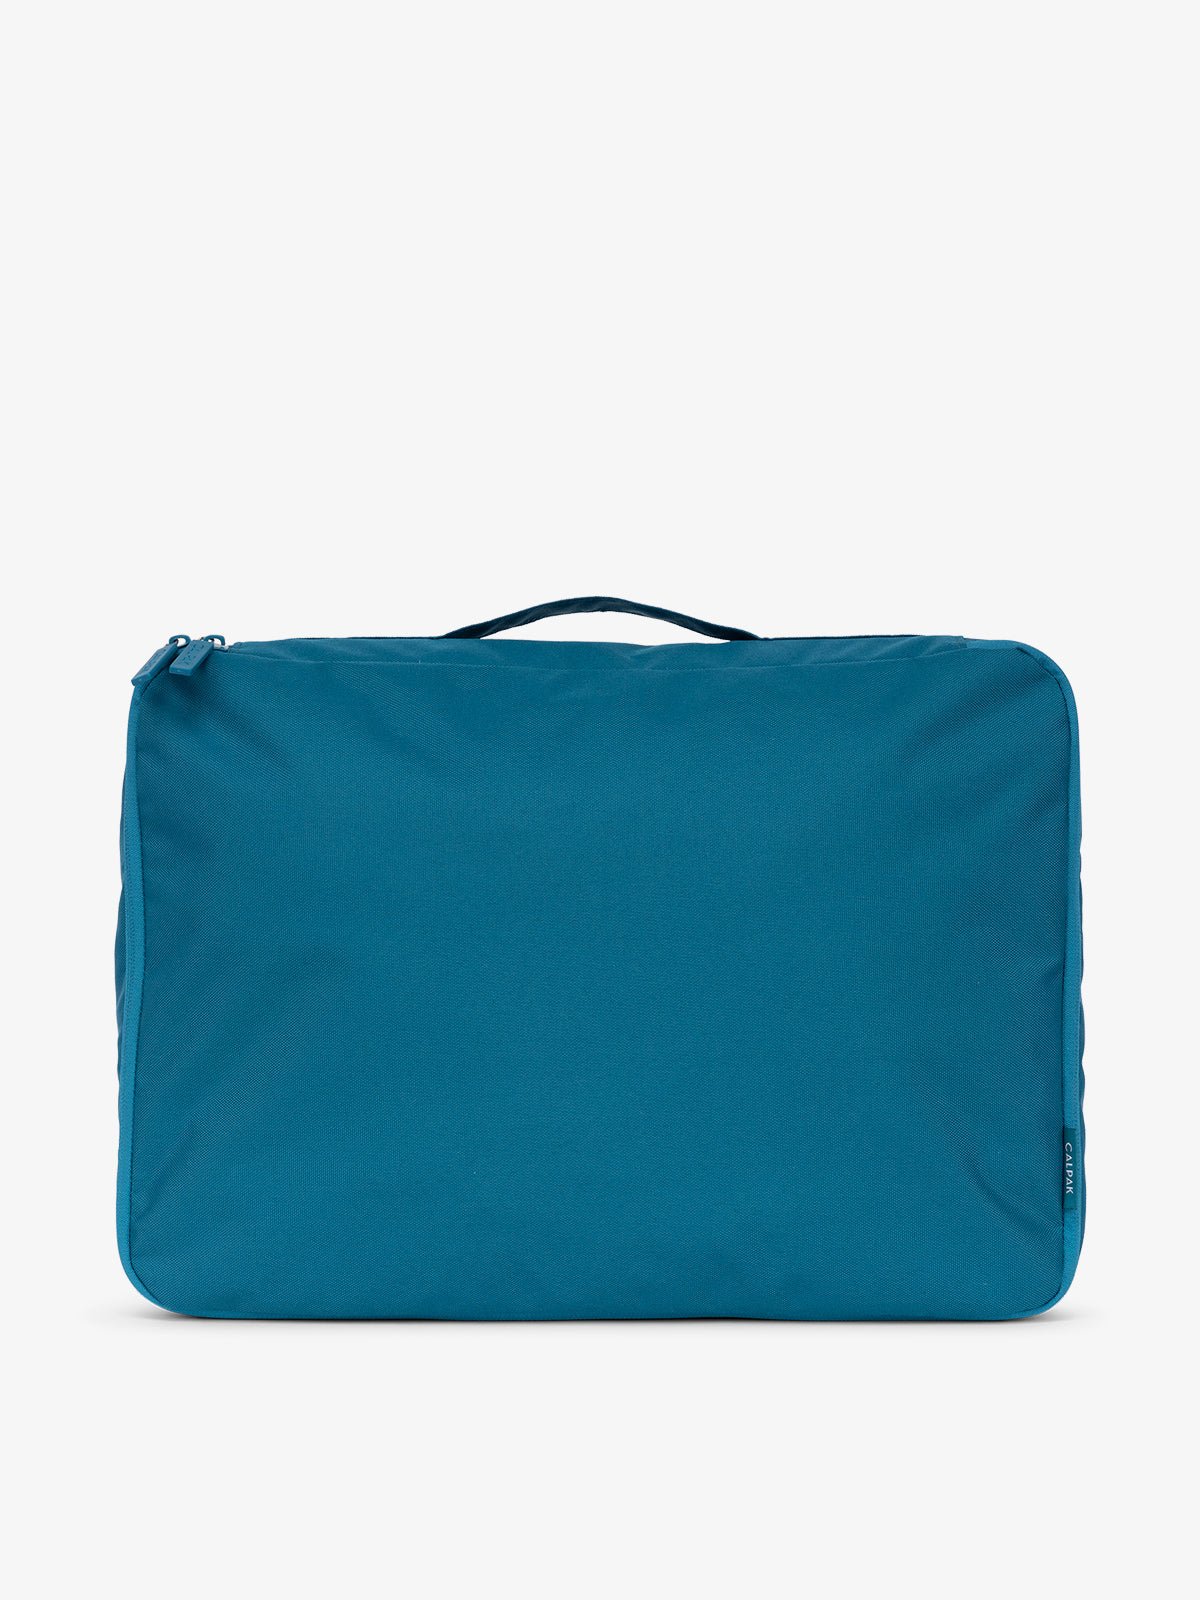 CALPAK large packing cubes with top handle in blue